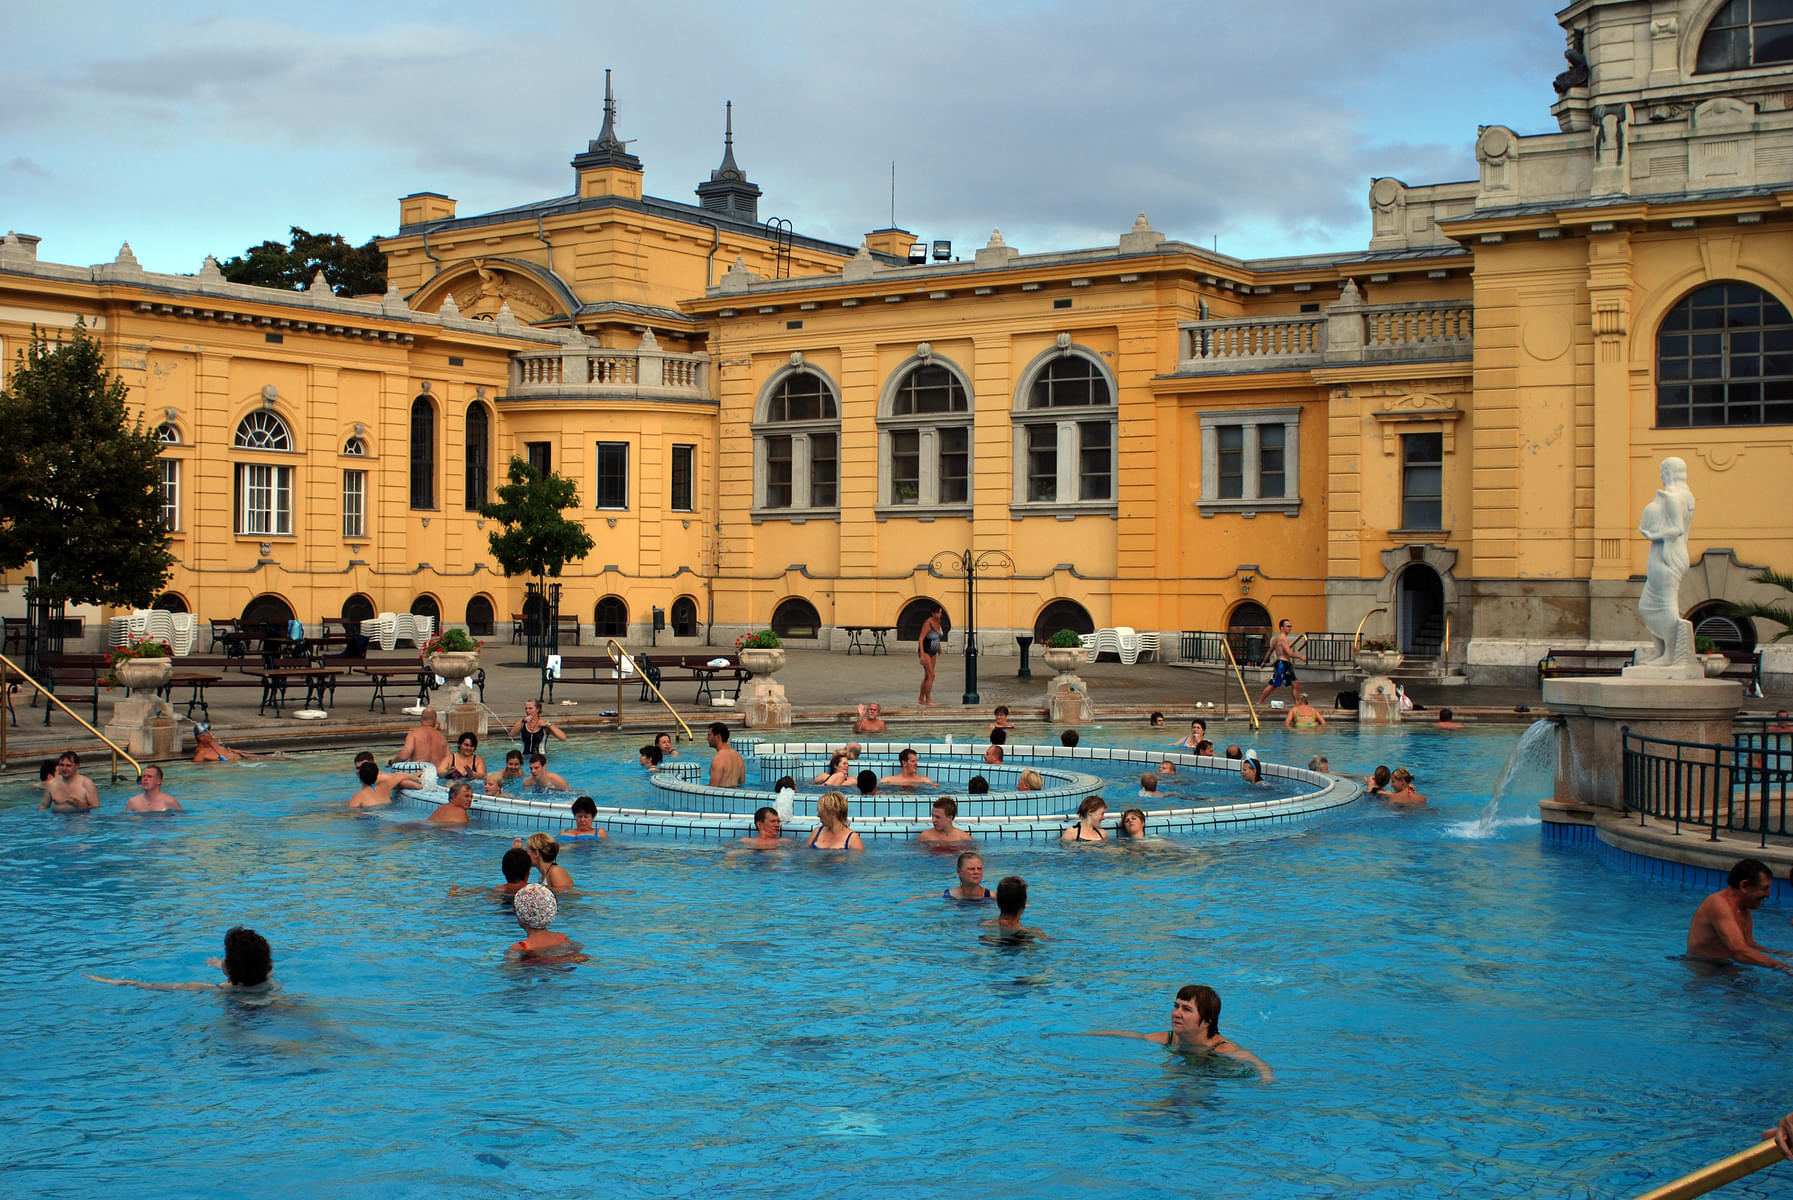 What To Expect From Thermal Baths In Budapest?